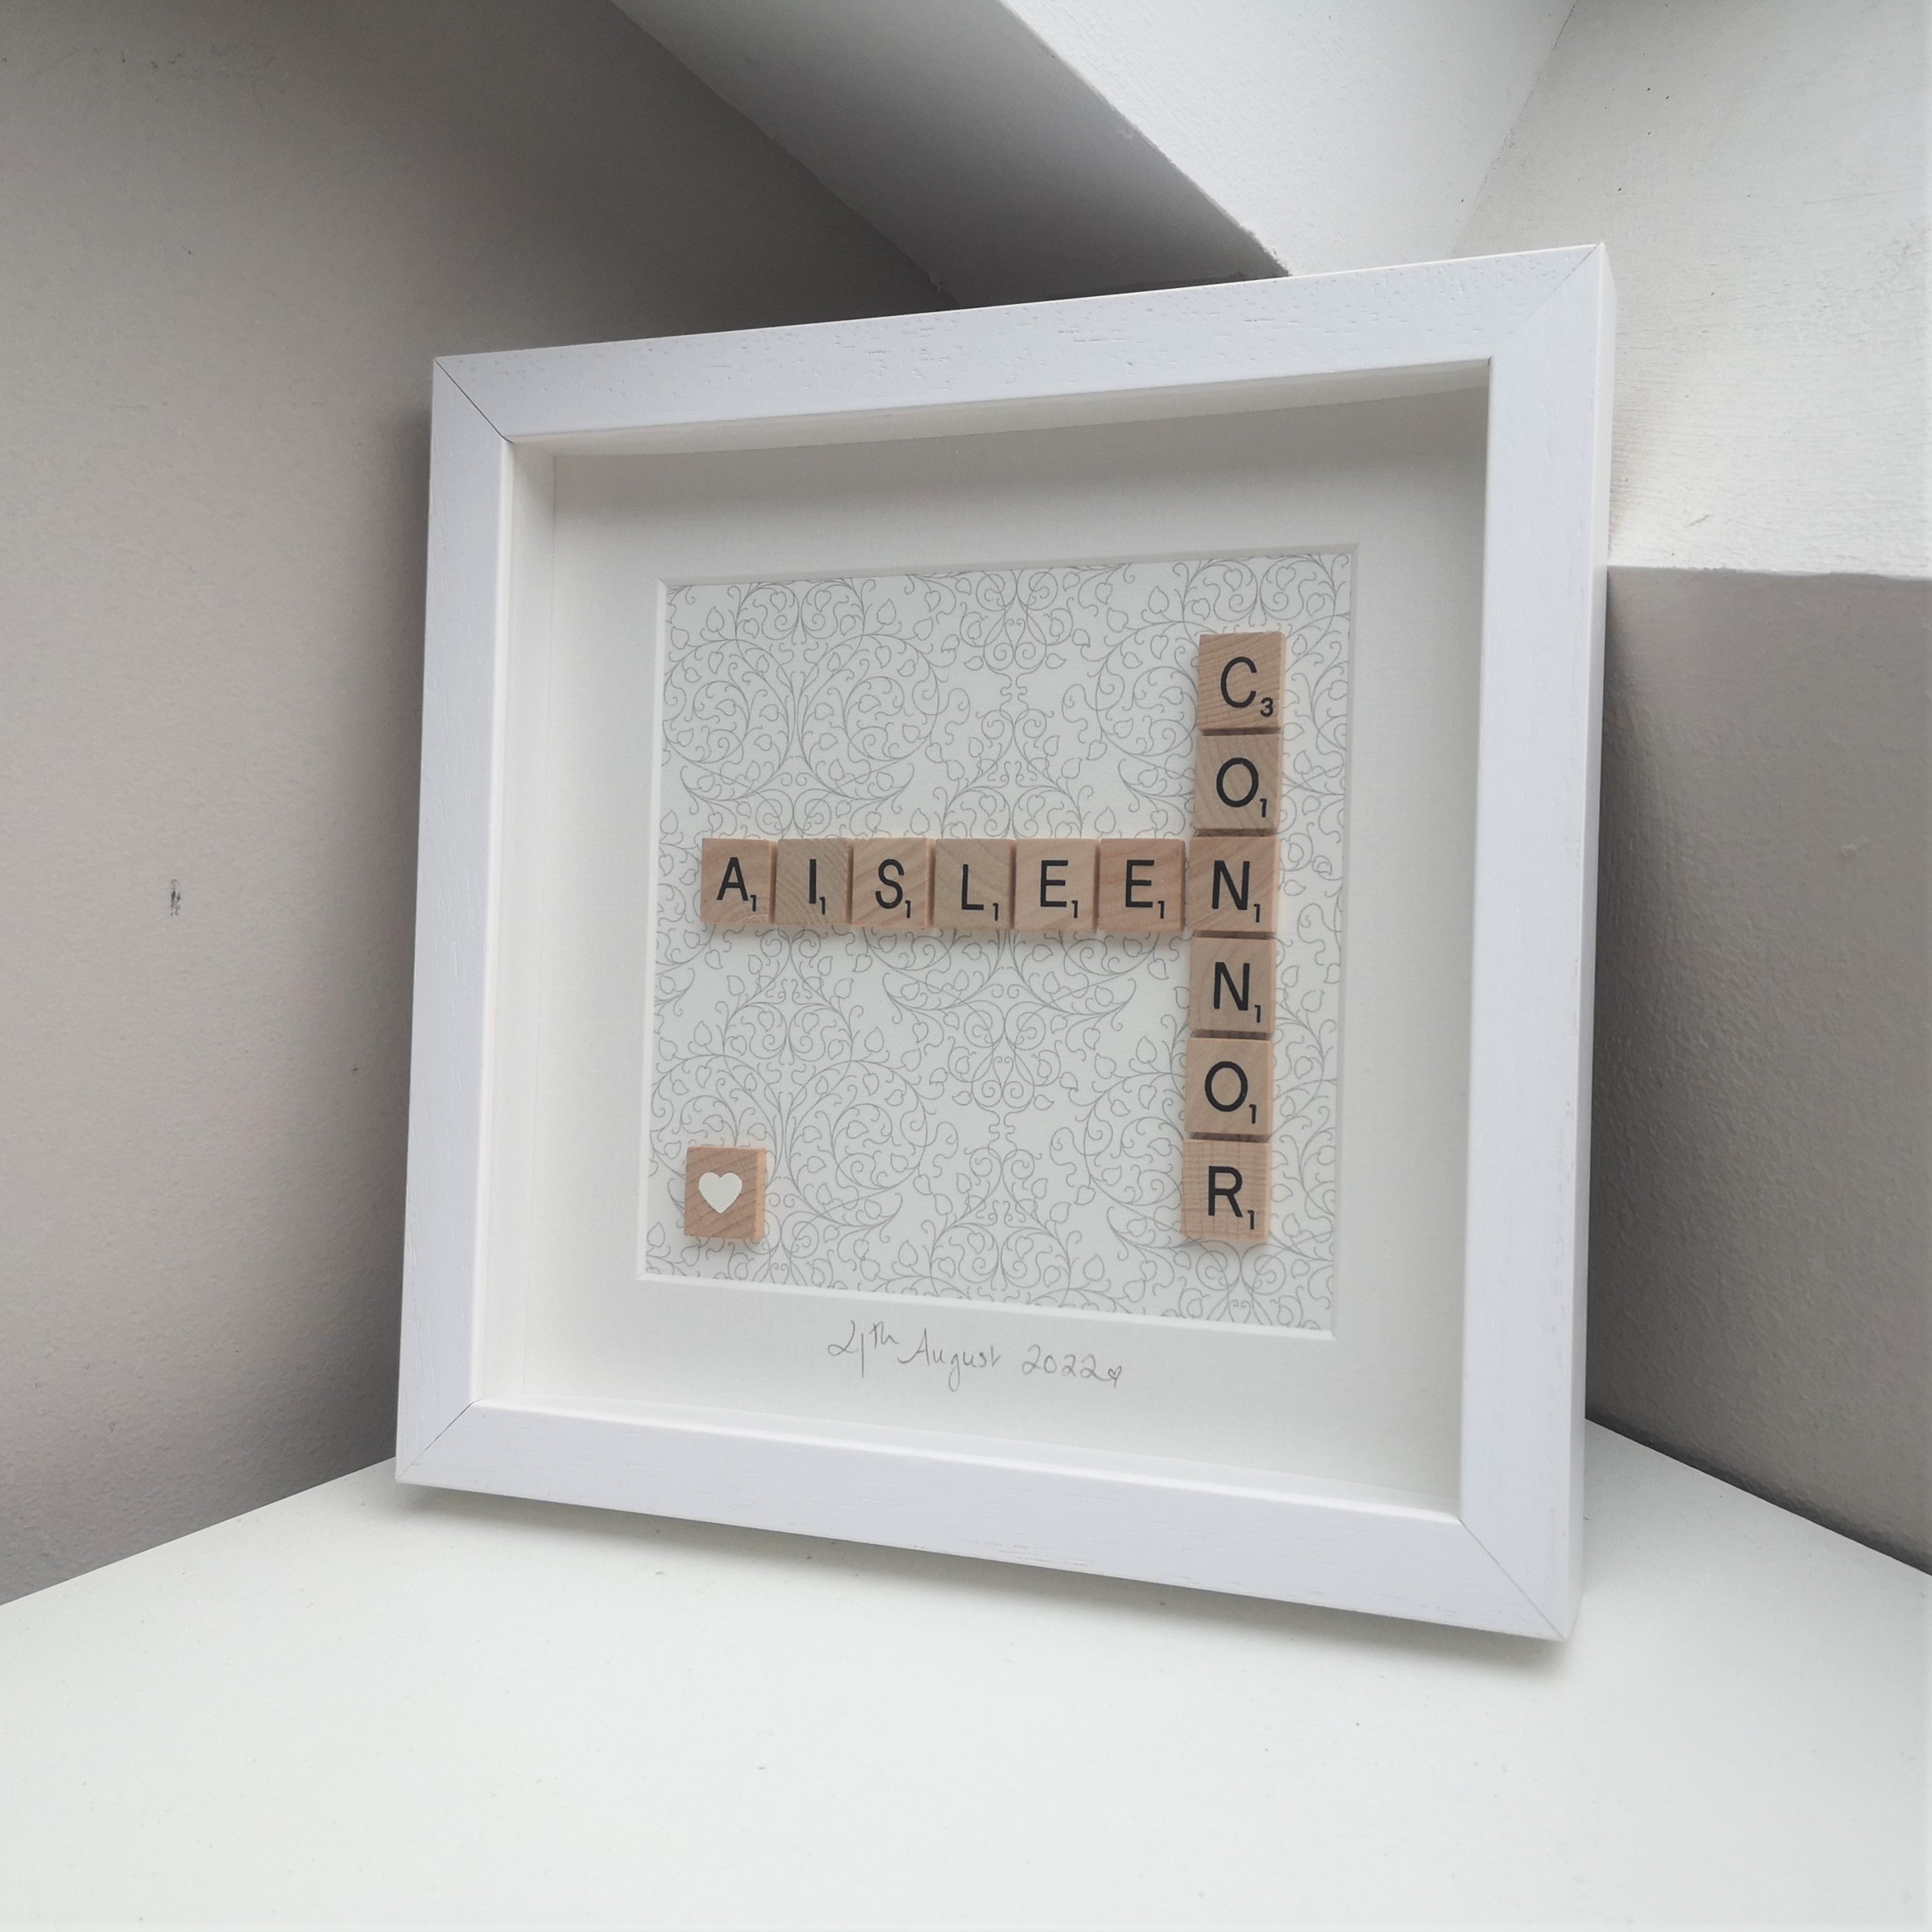 Personalised Wedding Scrabble name frame with 2 names on a teal damask background